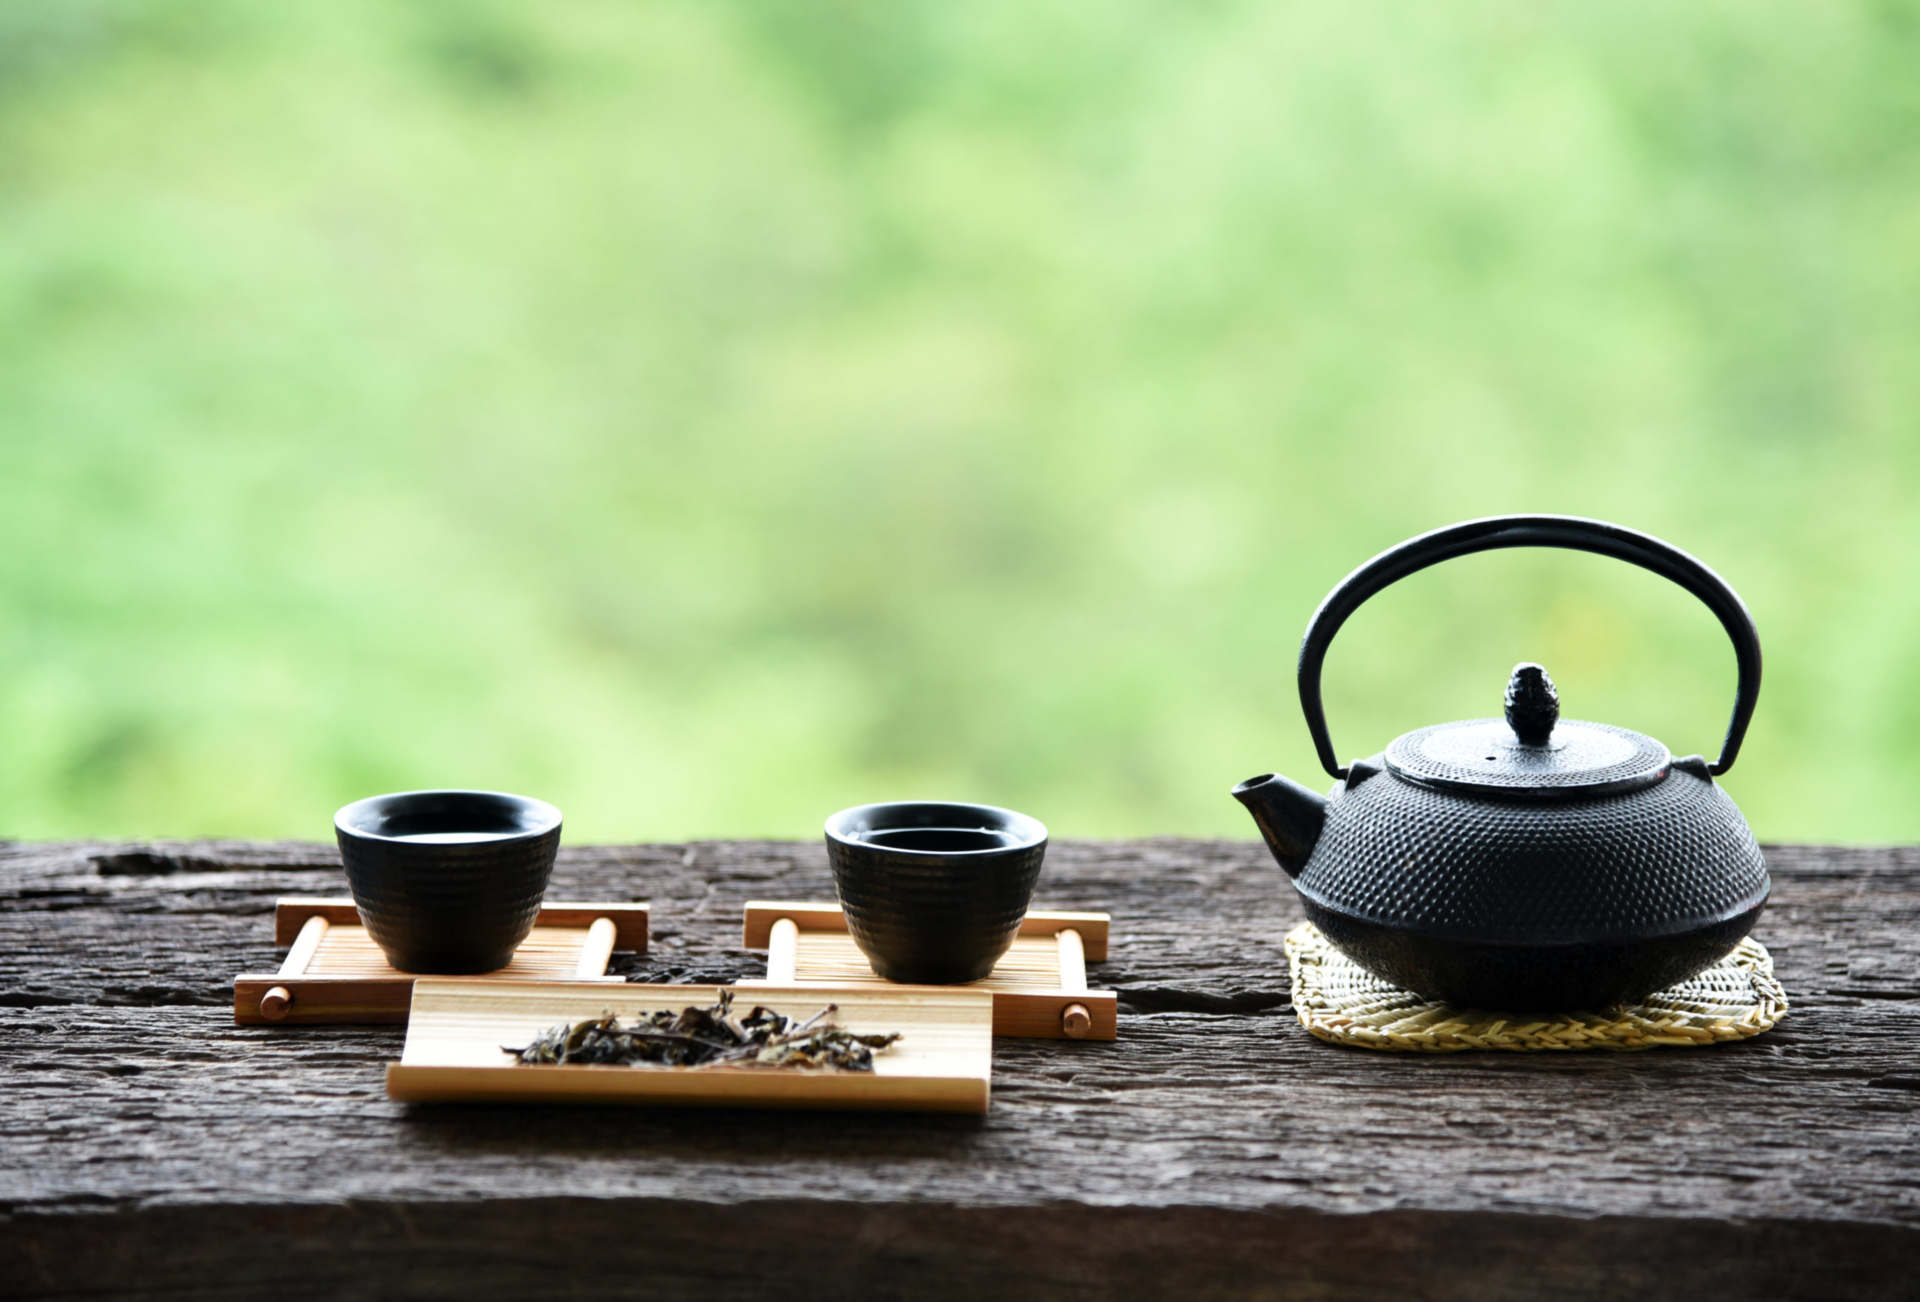 Chinese tea set on a wooden outdoor bench.